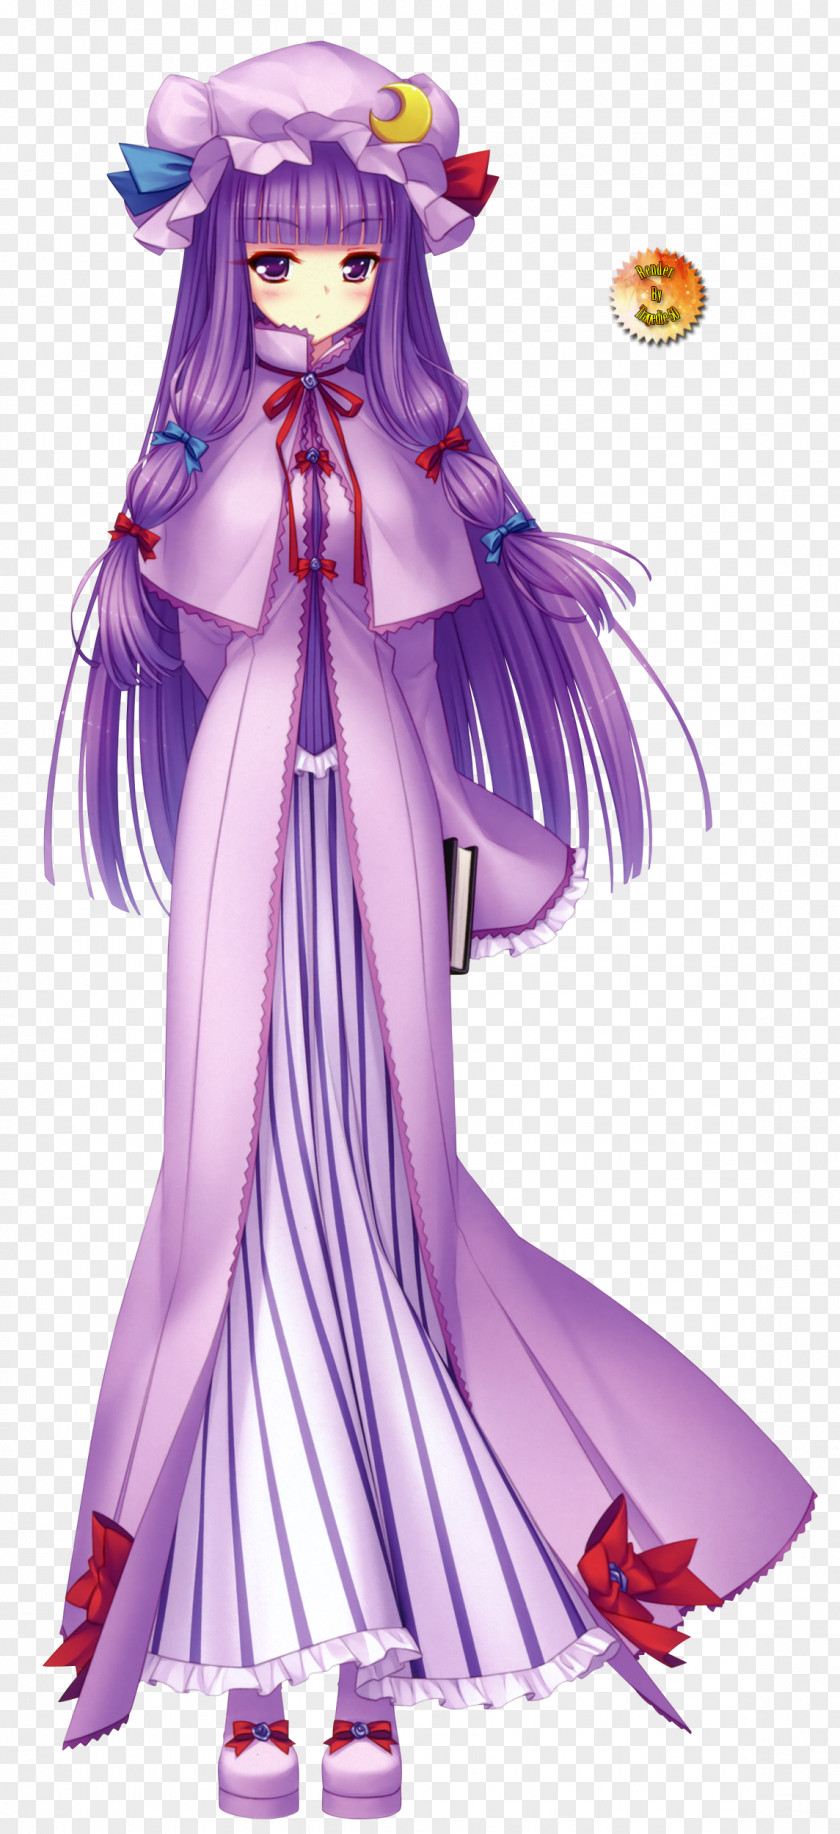 Knowledge Touhou Project Image Alice Margatroid Patchouli PNG